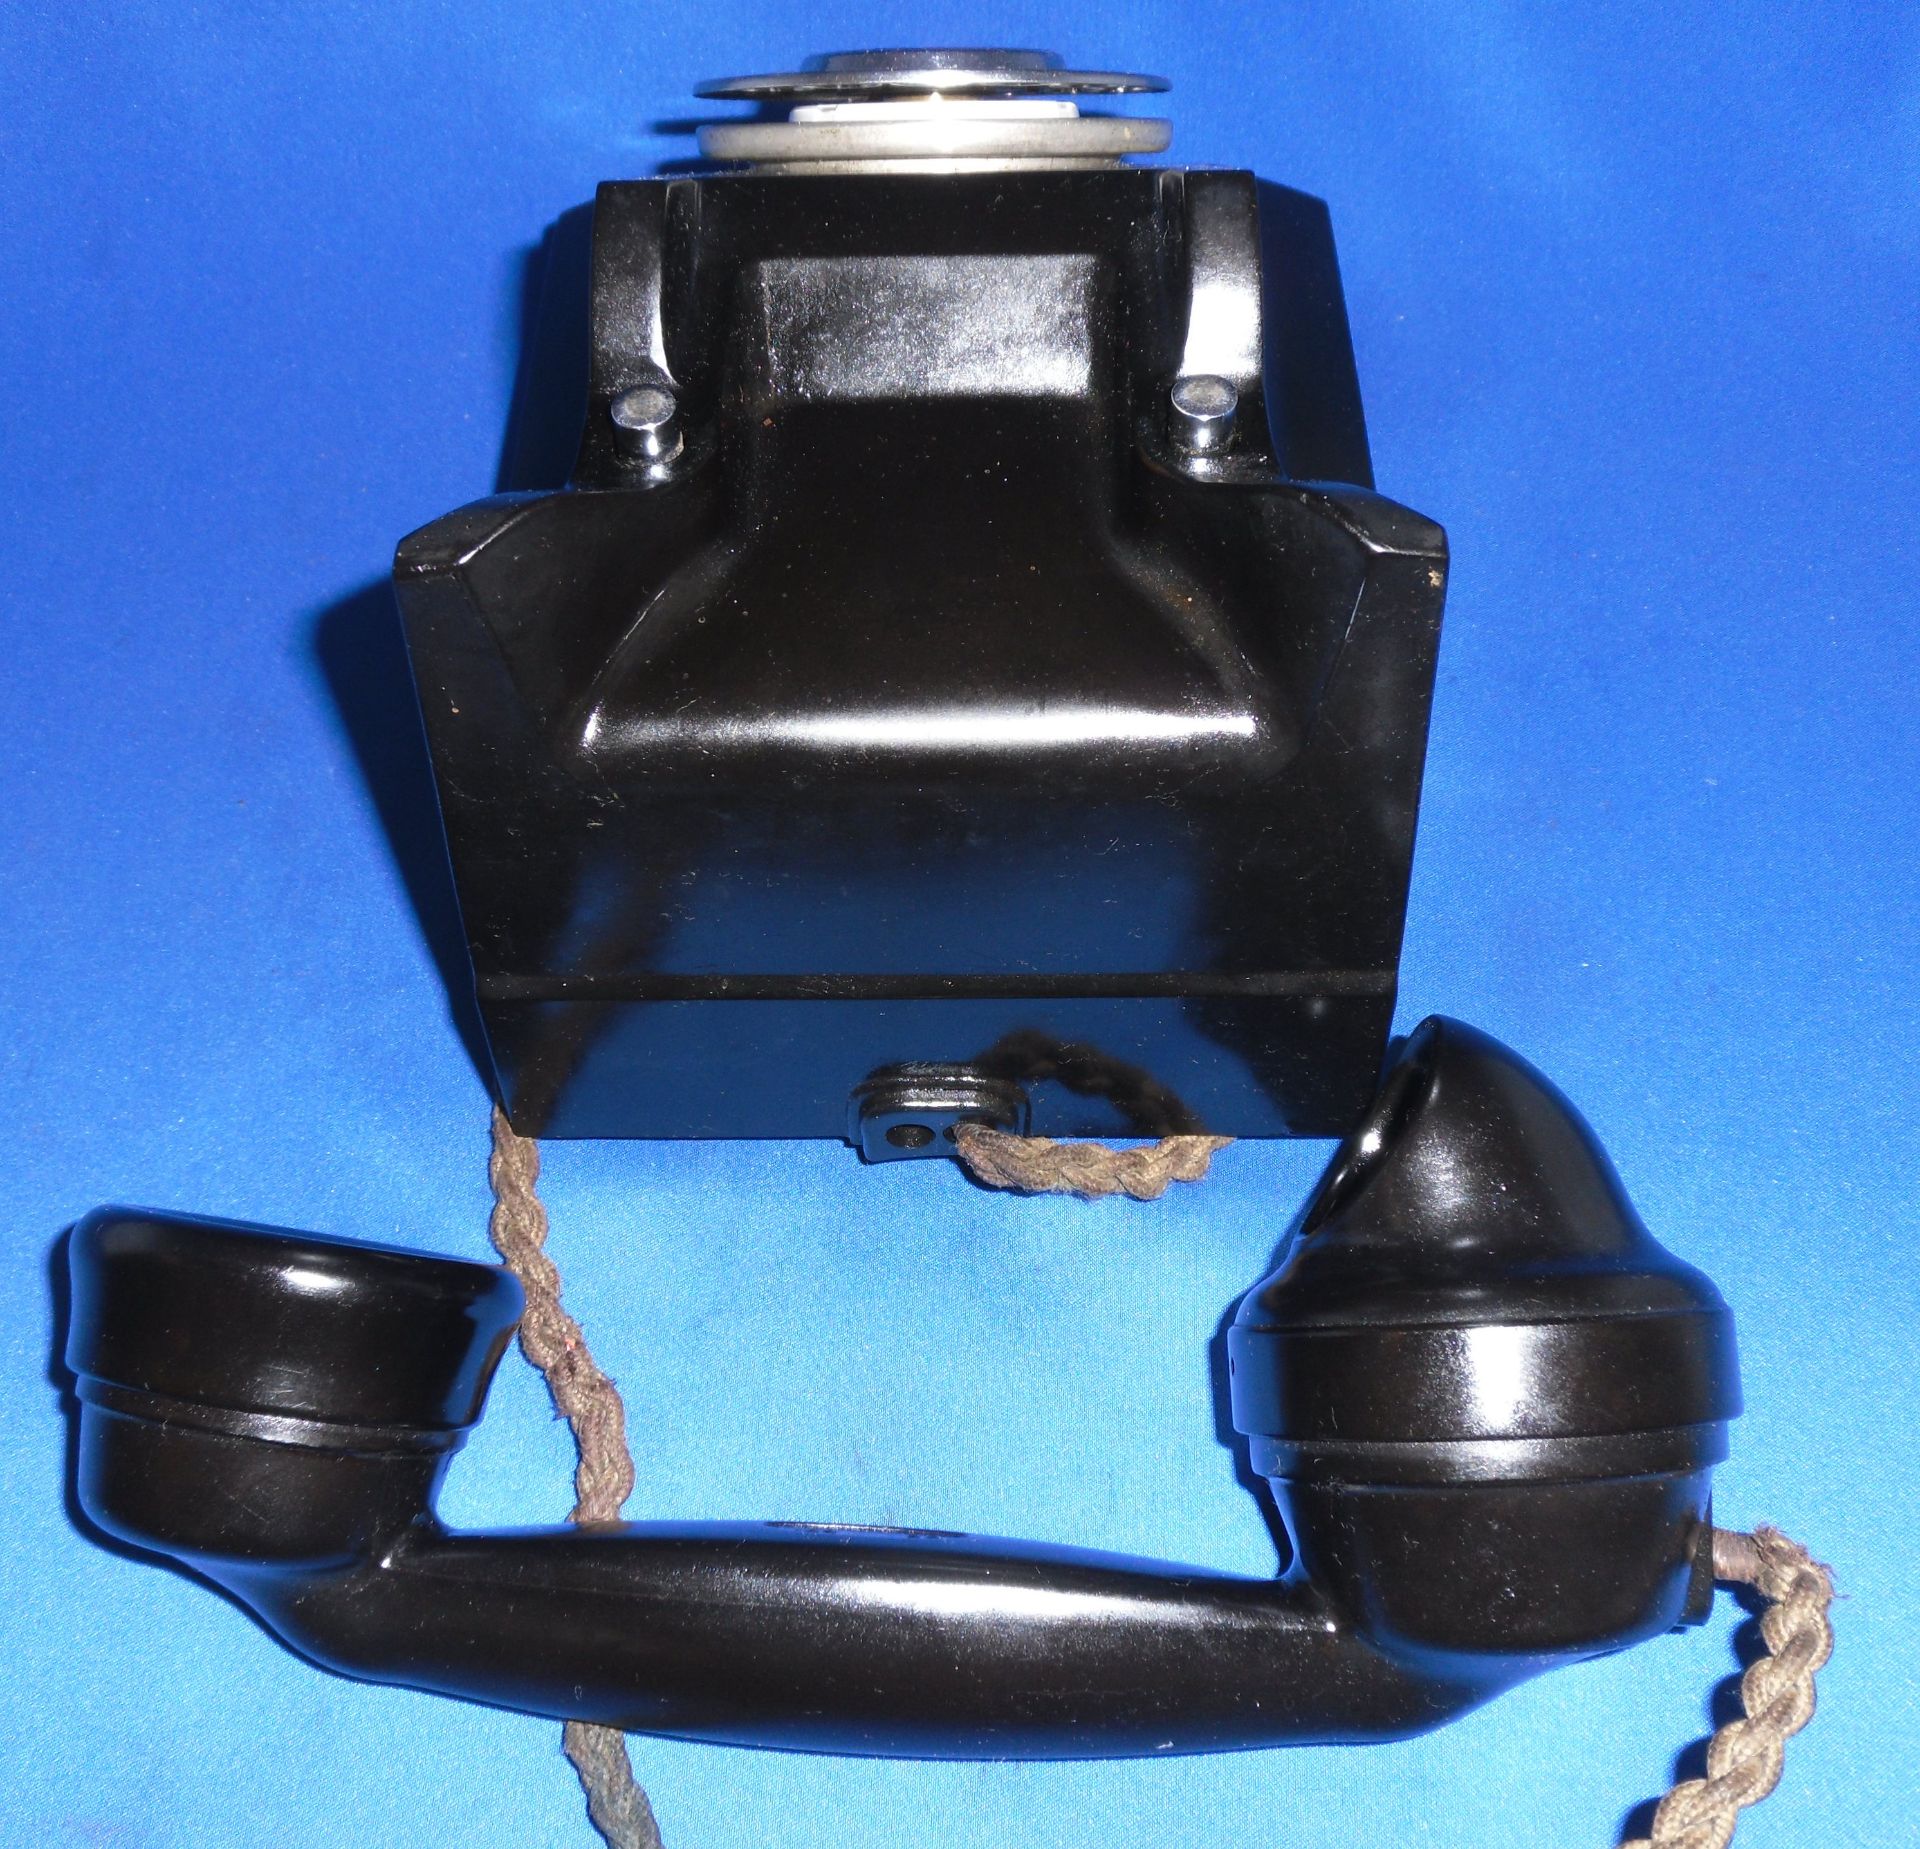 Vintage Bakelite Telephone Standard Telephone and Cables Limited 1958 - Image 8 of 8